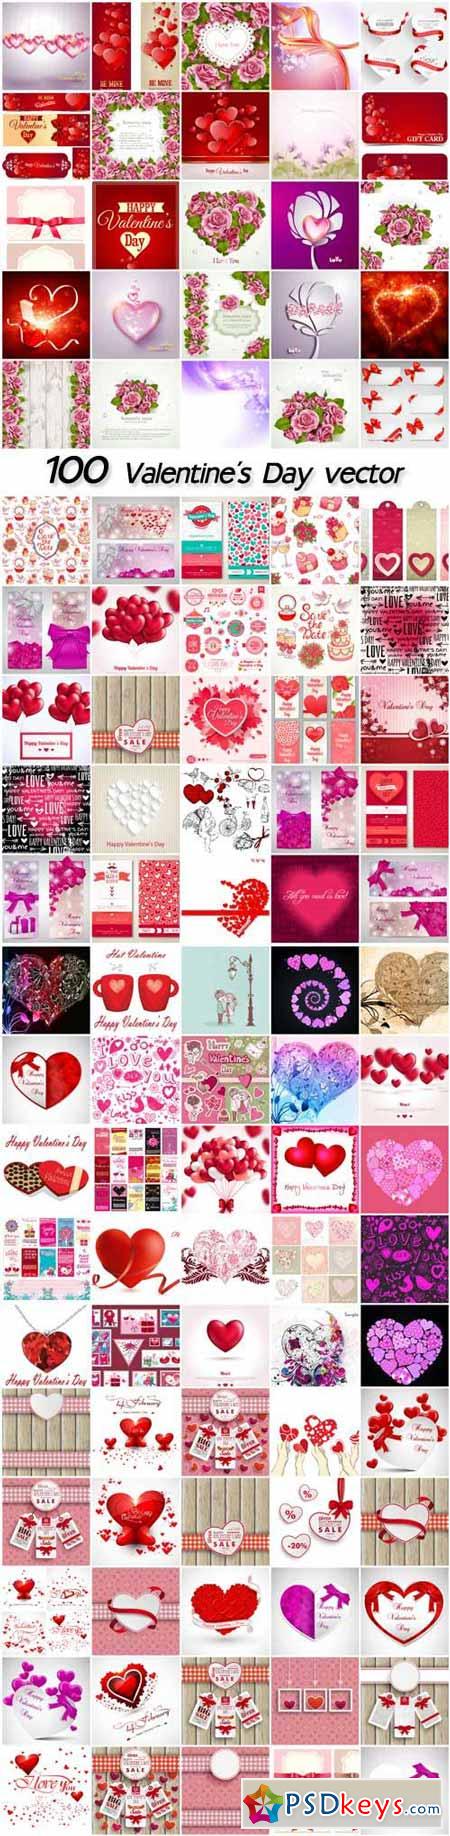 Valentine's Day, vector backgrounds romantic, hearts, cupids